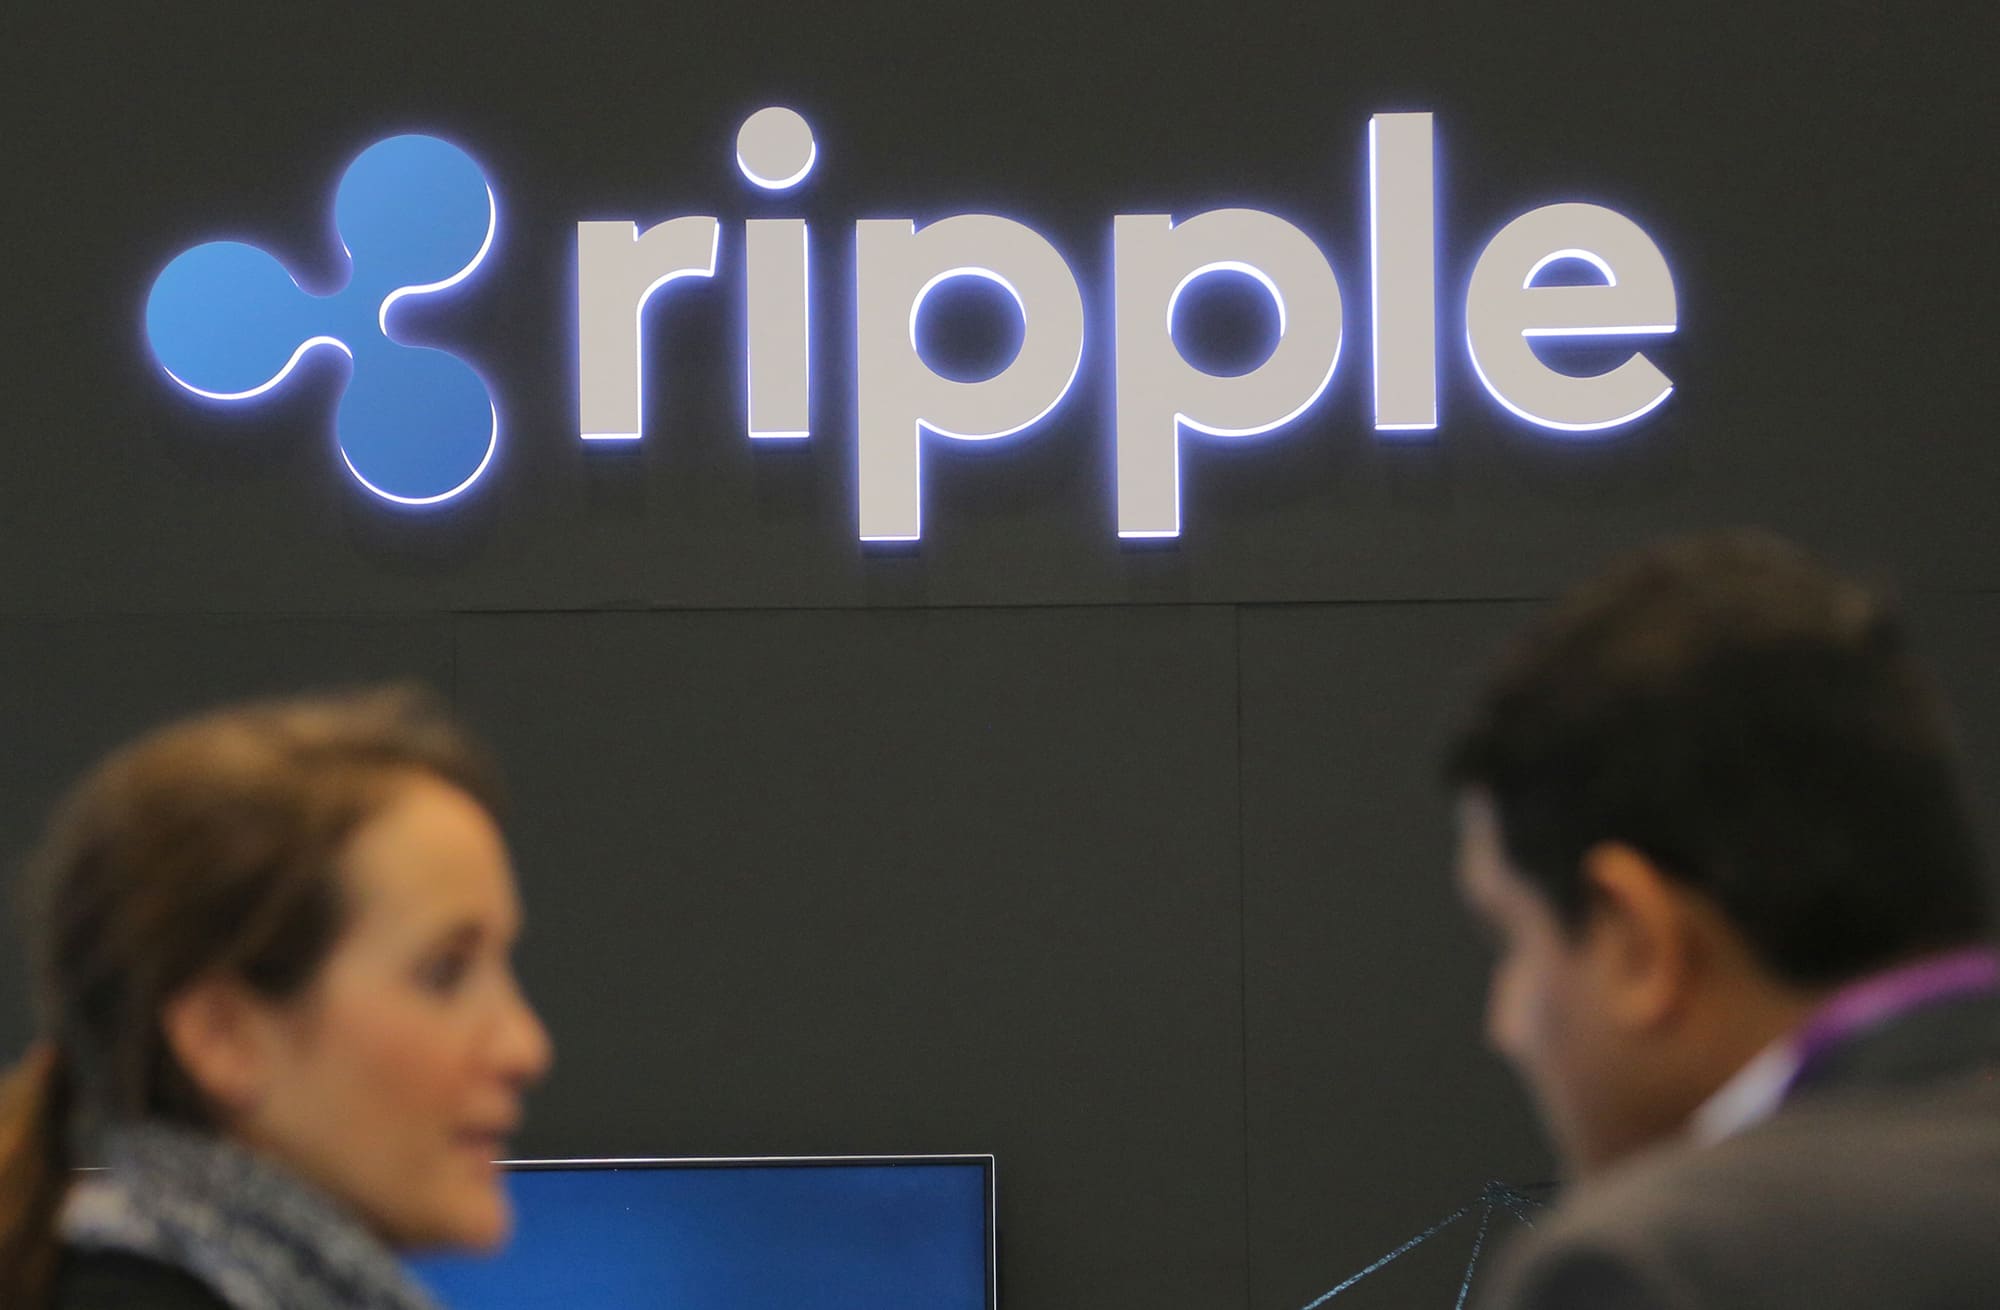 Ripple wants a piece of the global payment system